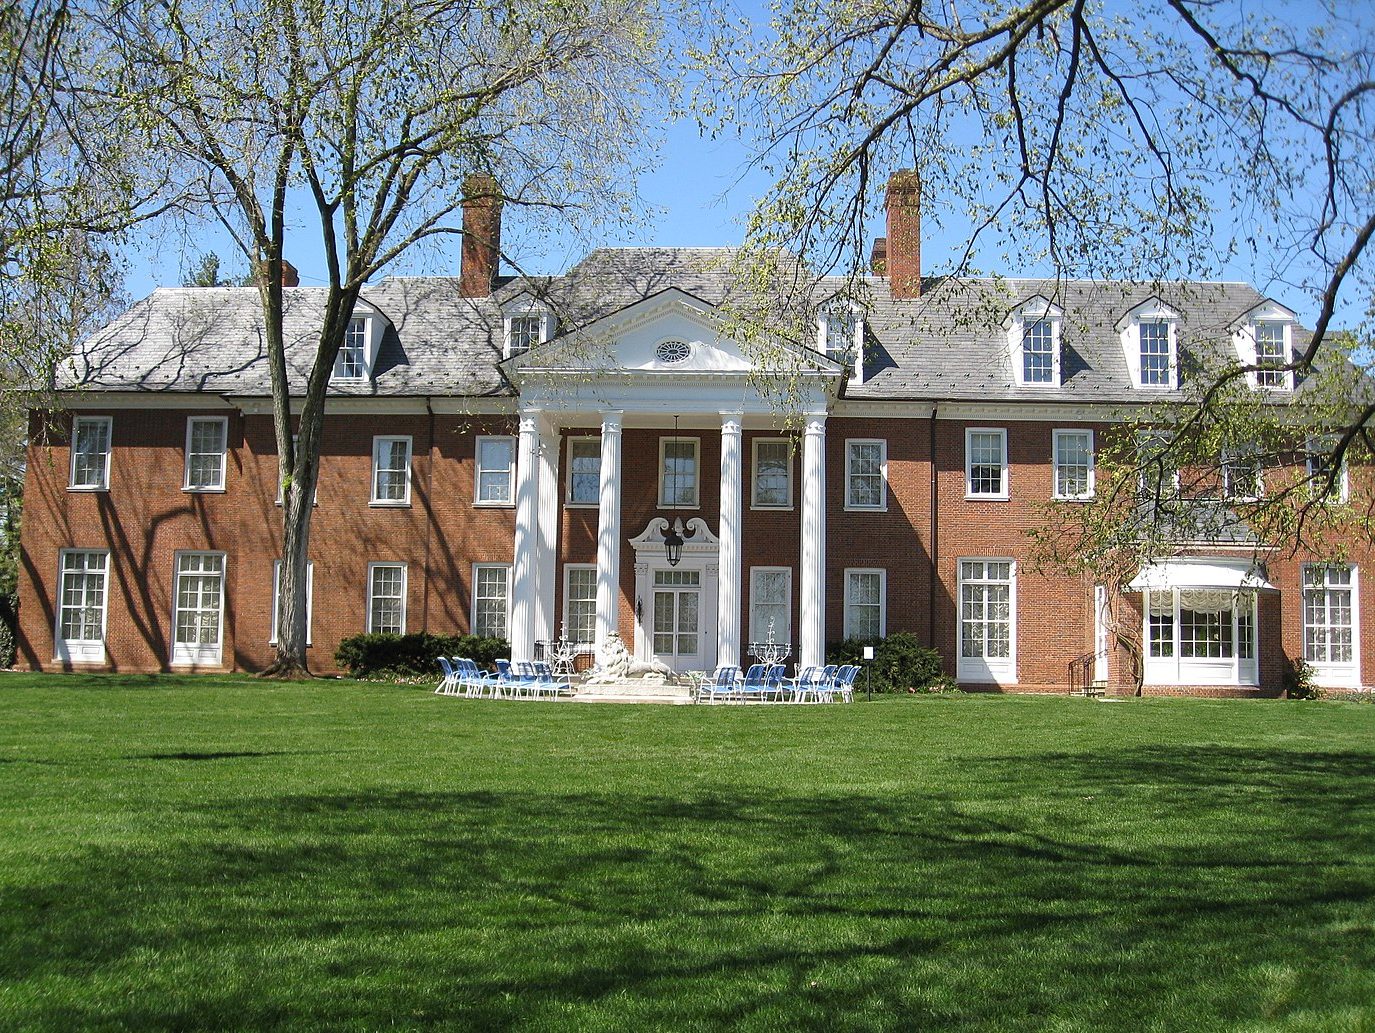 Hillwood Mansion and lawn